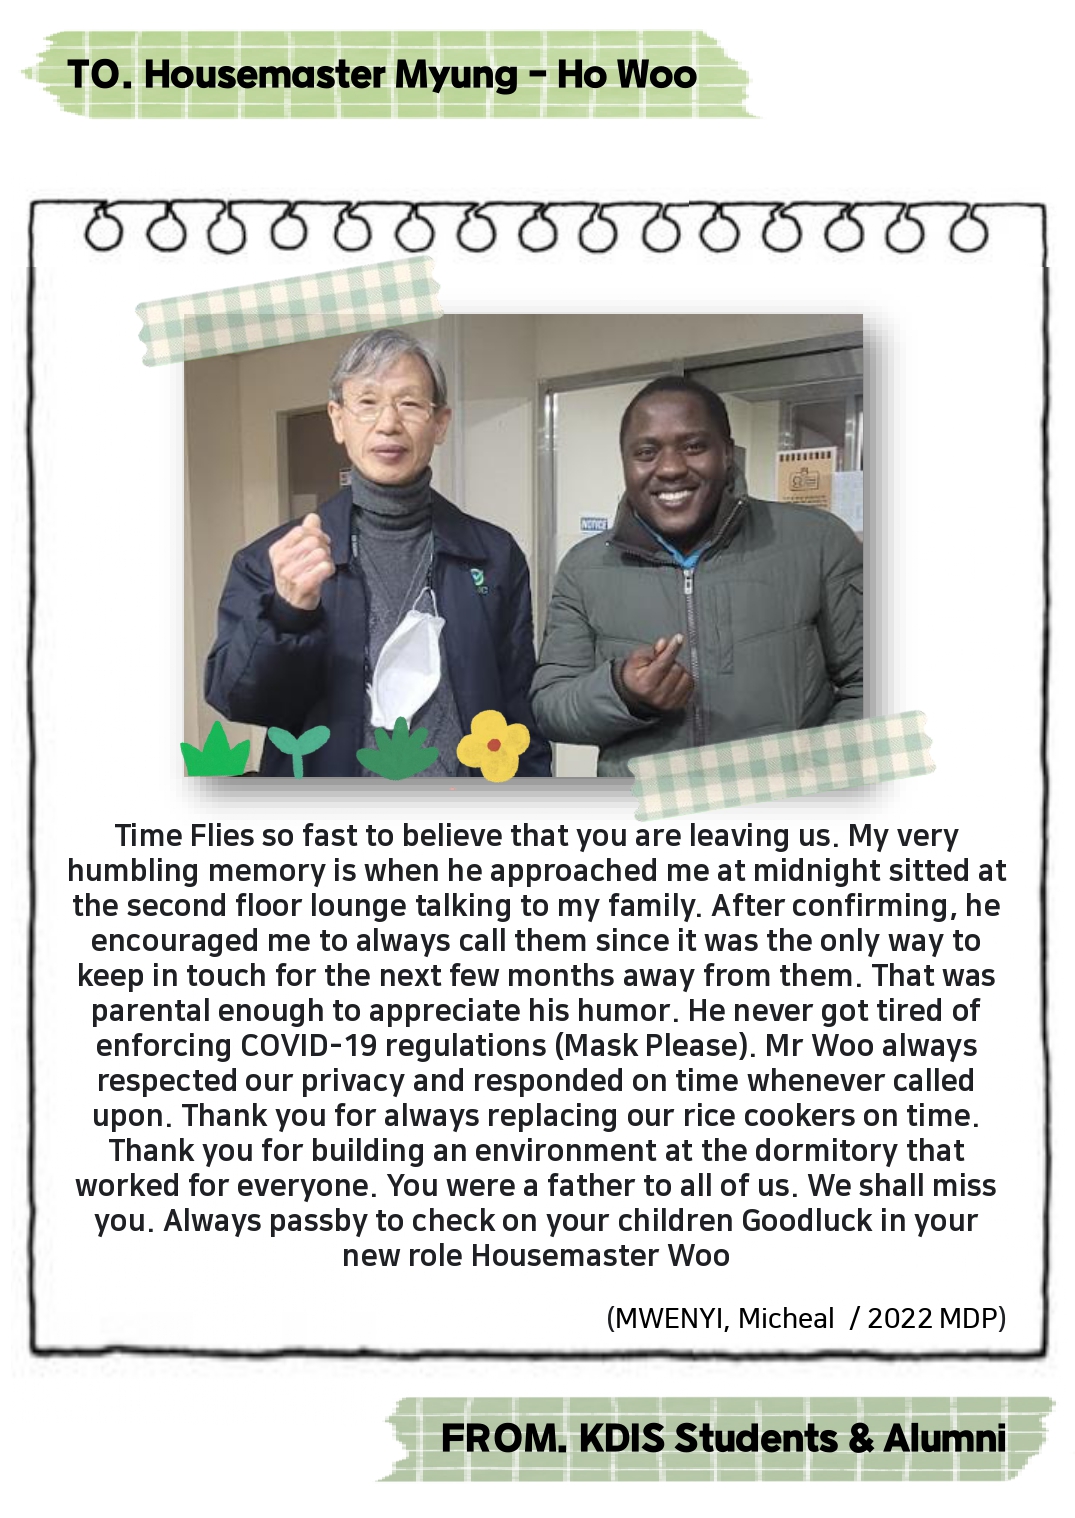 Thank you Housemaster Myung-ho Woo -Messages from KDIS Students and Alumni 사진32